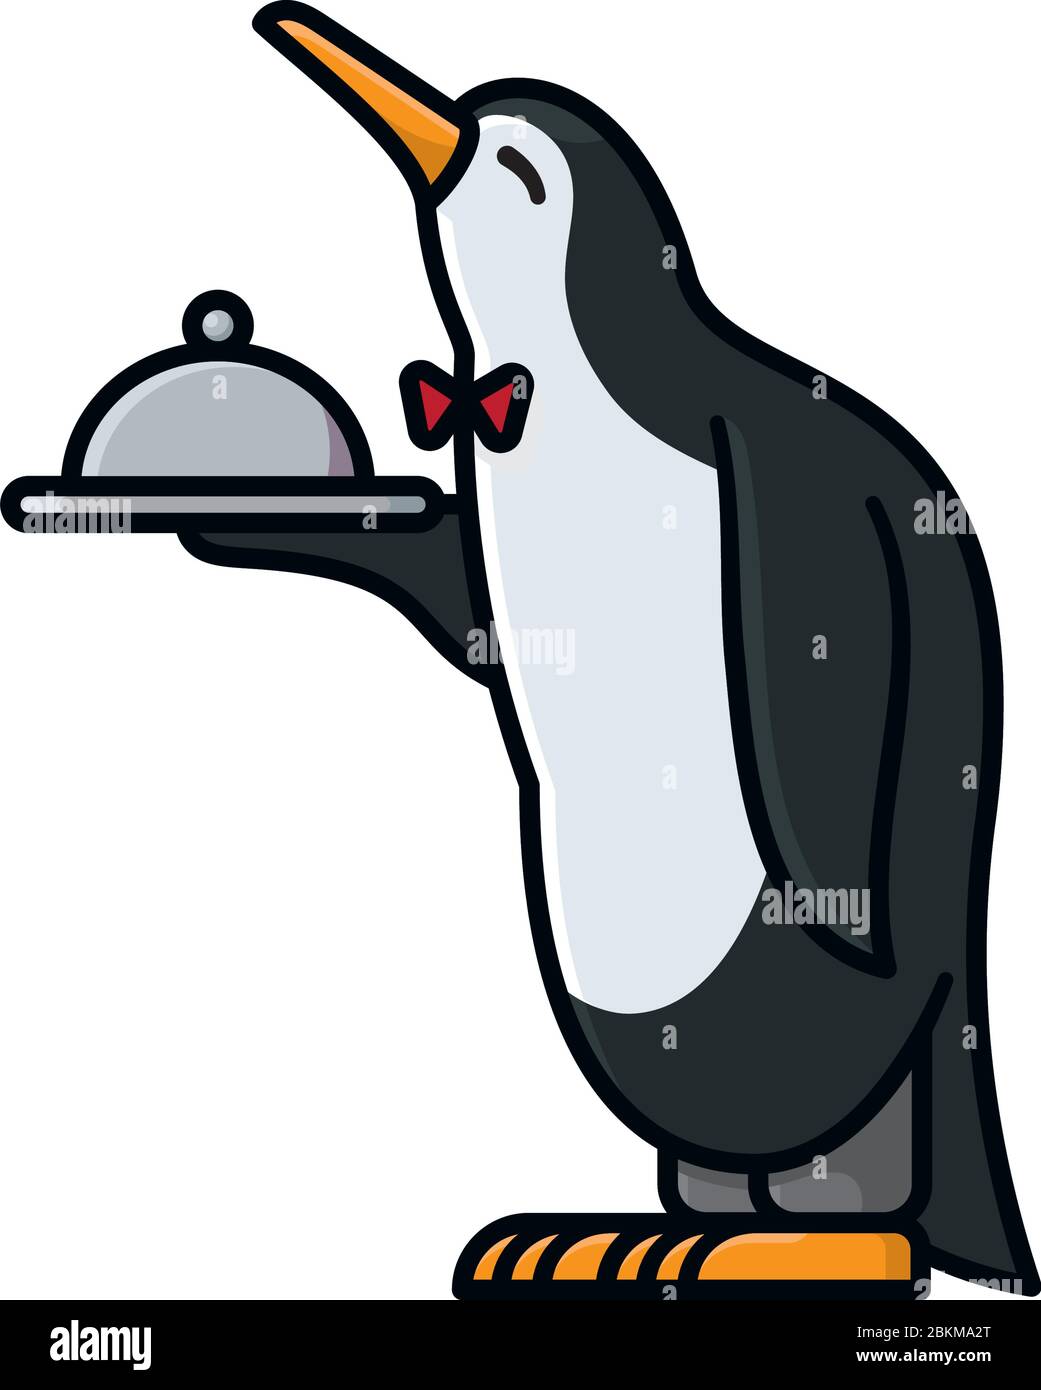 Servile waiter penguin cartoon character isolated vector illustration for Waiters Day on May 16th. Service and obsequiosity symbol. Stock Vector